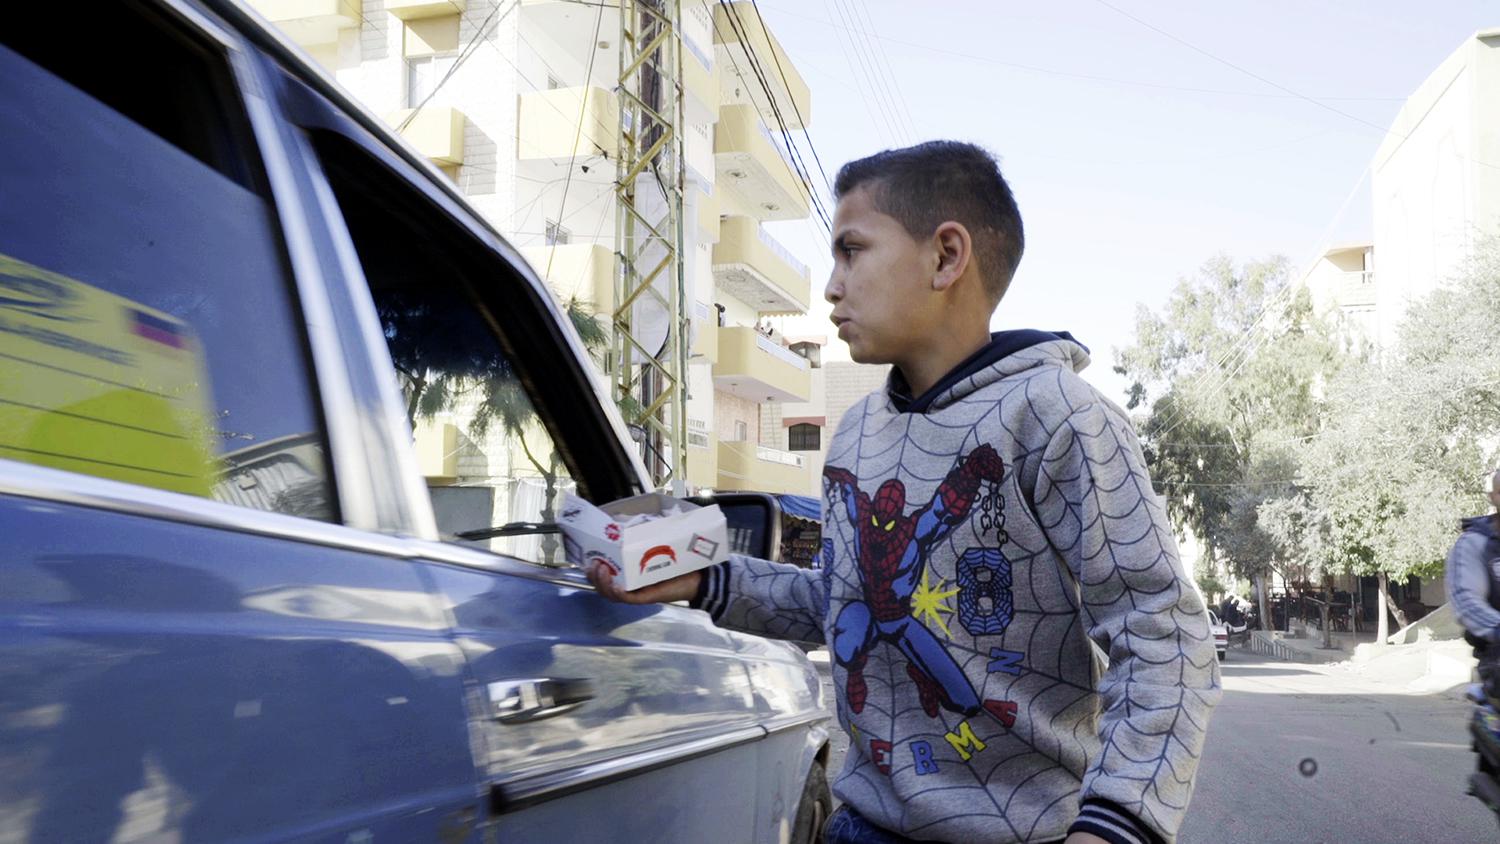 Nizar, 10, has not gone to school in Lebanon since arriving from the outskirts of Damascus in 2011. He sells gum on the street in Mount Lebanon every day to help support his family. 